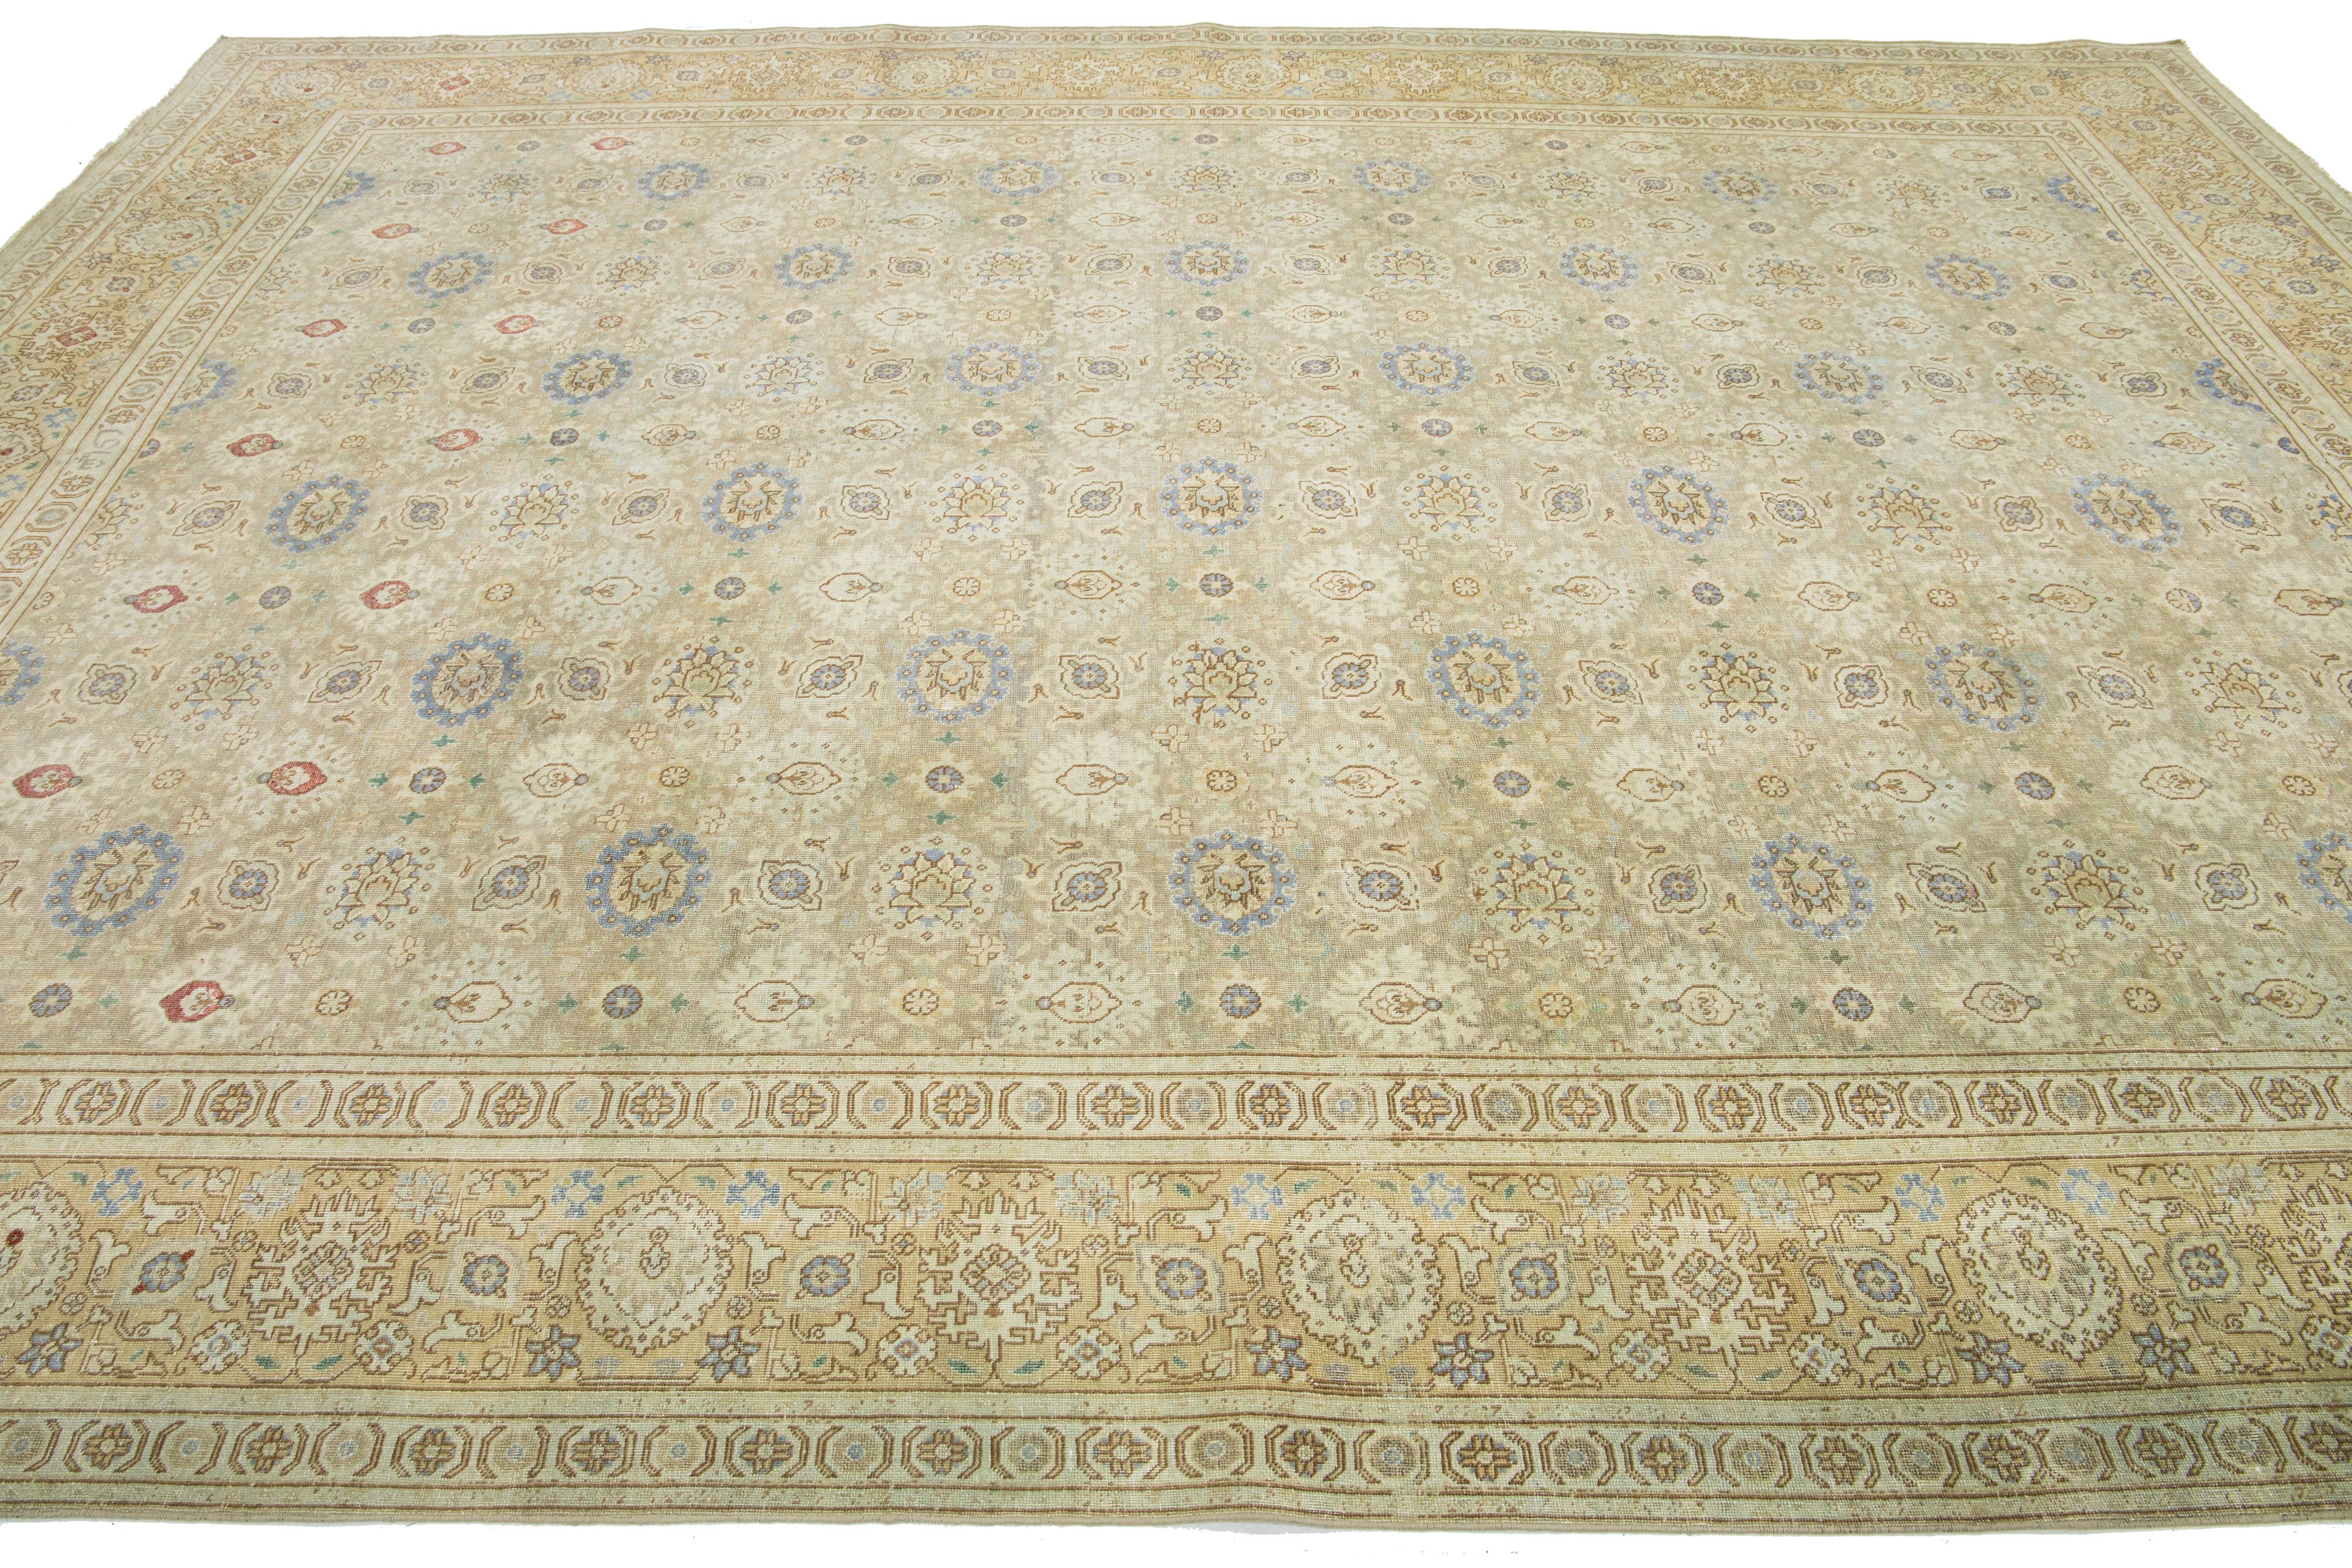 Antique 1920s Persian Tabriz Wool Rug With Floral Pattern In Beige  In Good Condition For Sale In Norwalk, CT